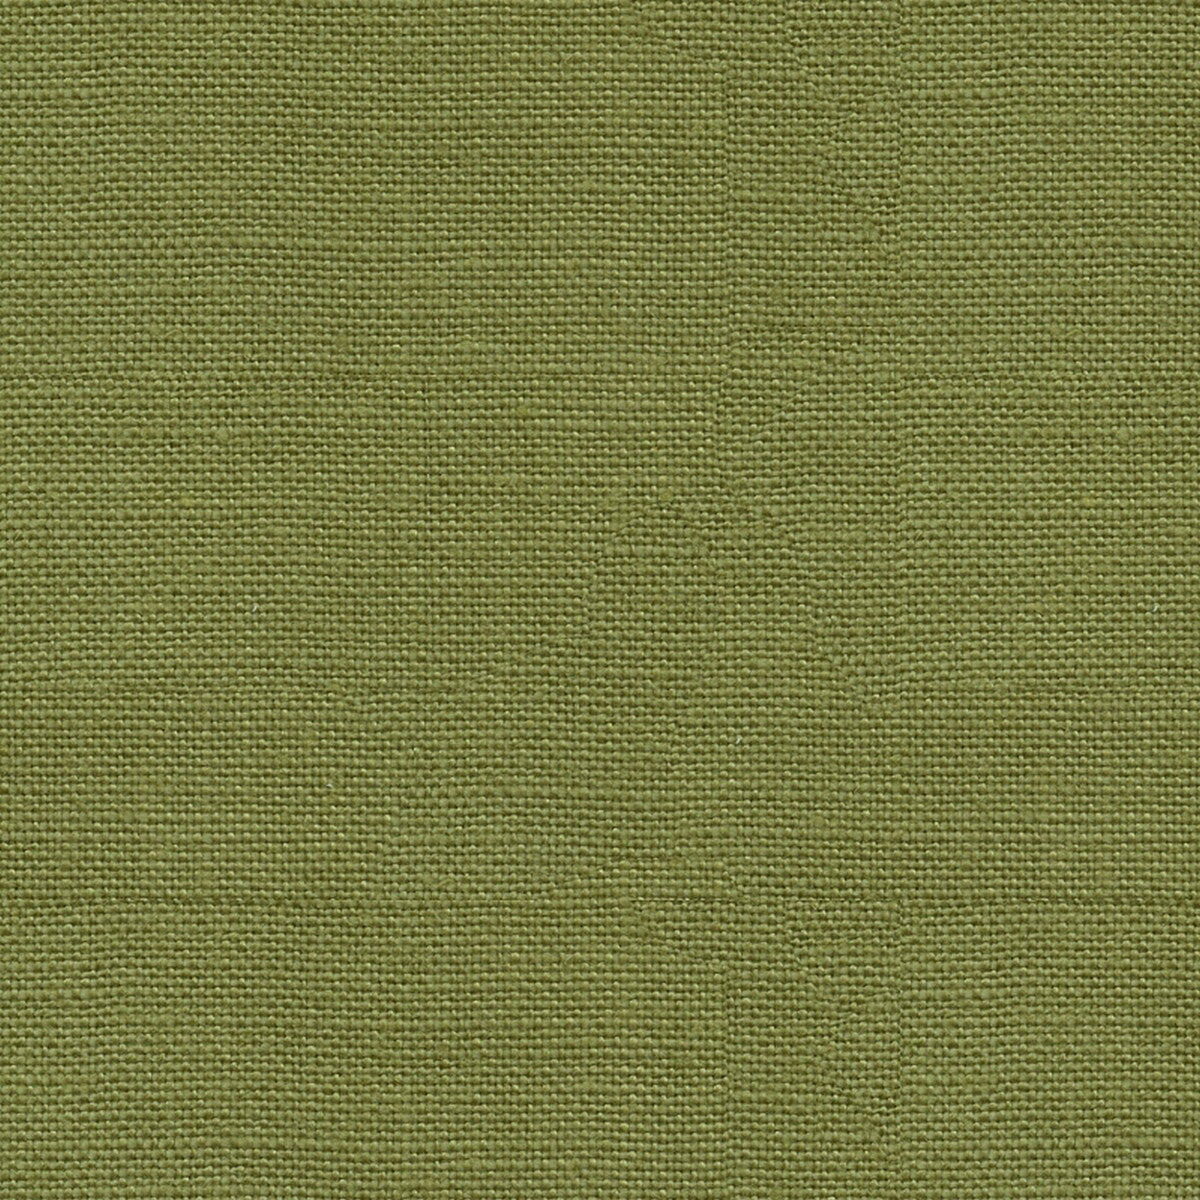 Weekend Linen fabric in olive color - pattern FD698.S112.0 - by Mulberry in the Crayford collection